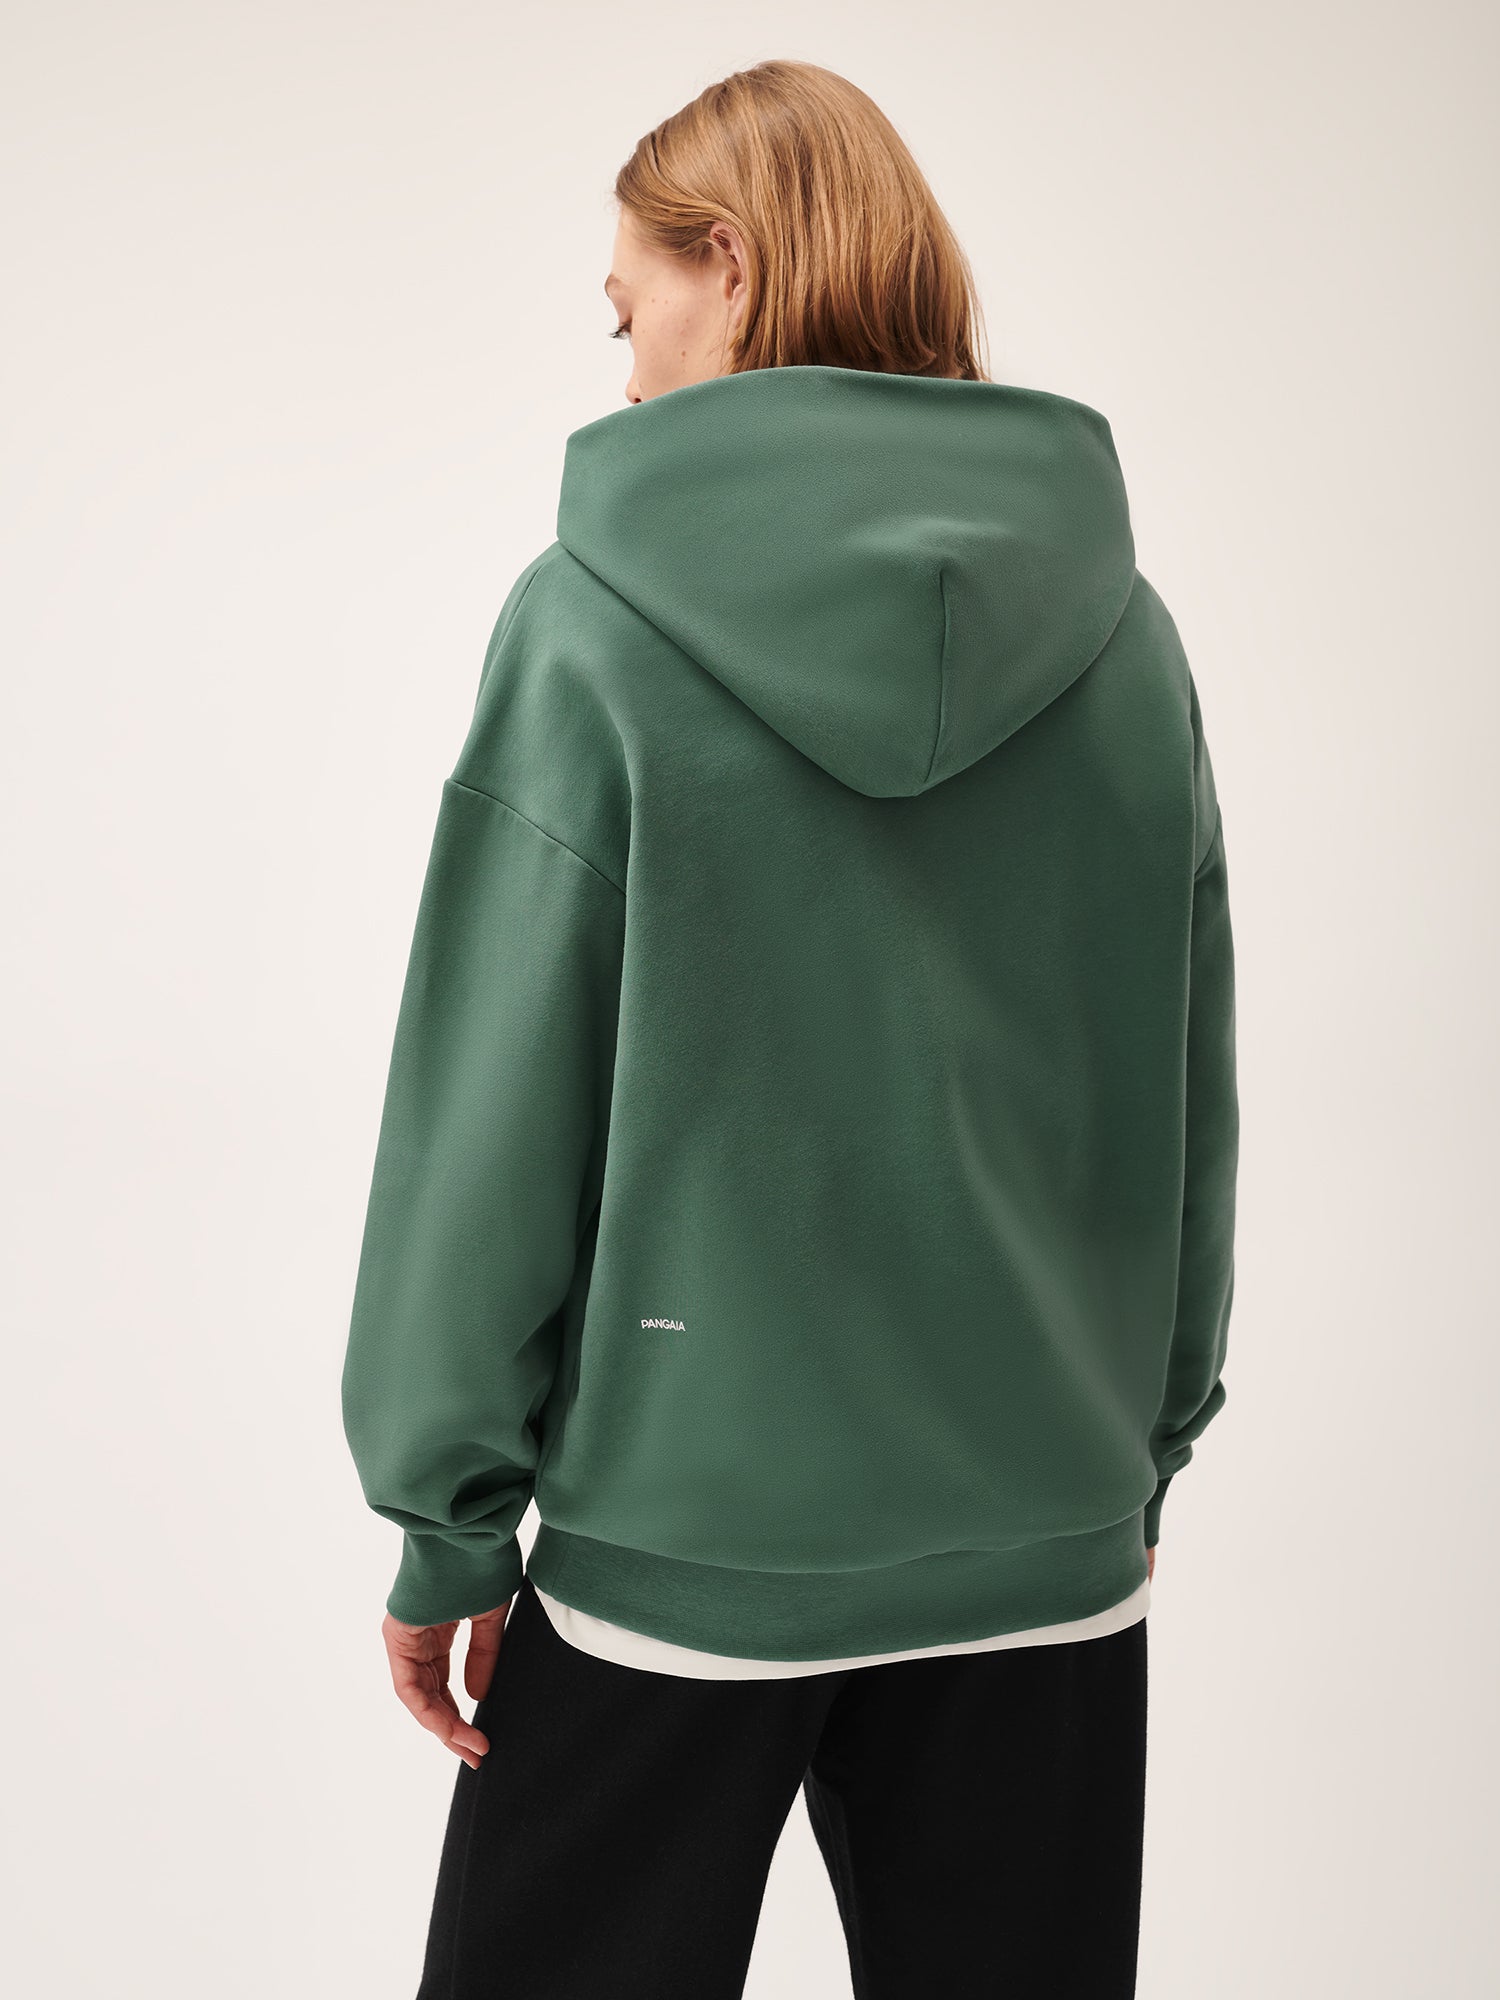 365_Hoodie_Forest_Green_female-2